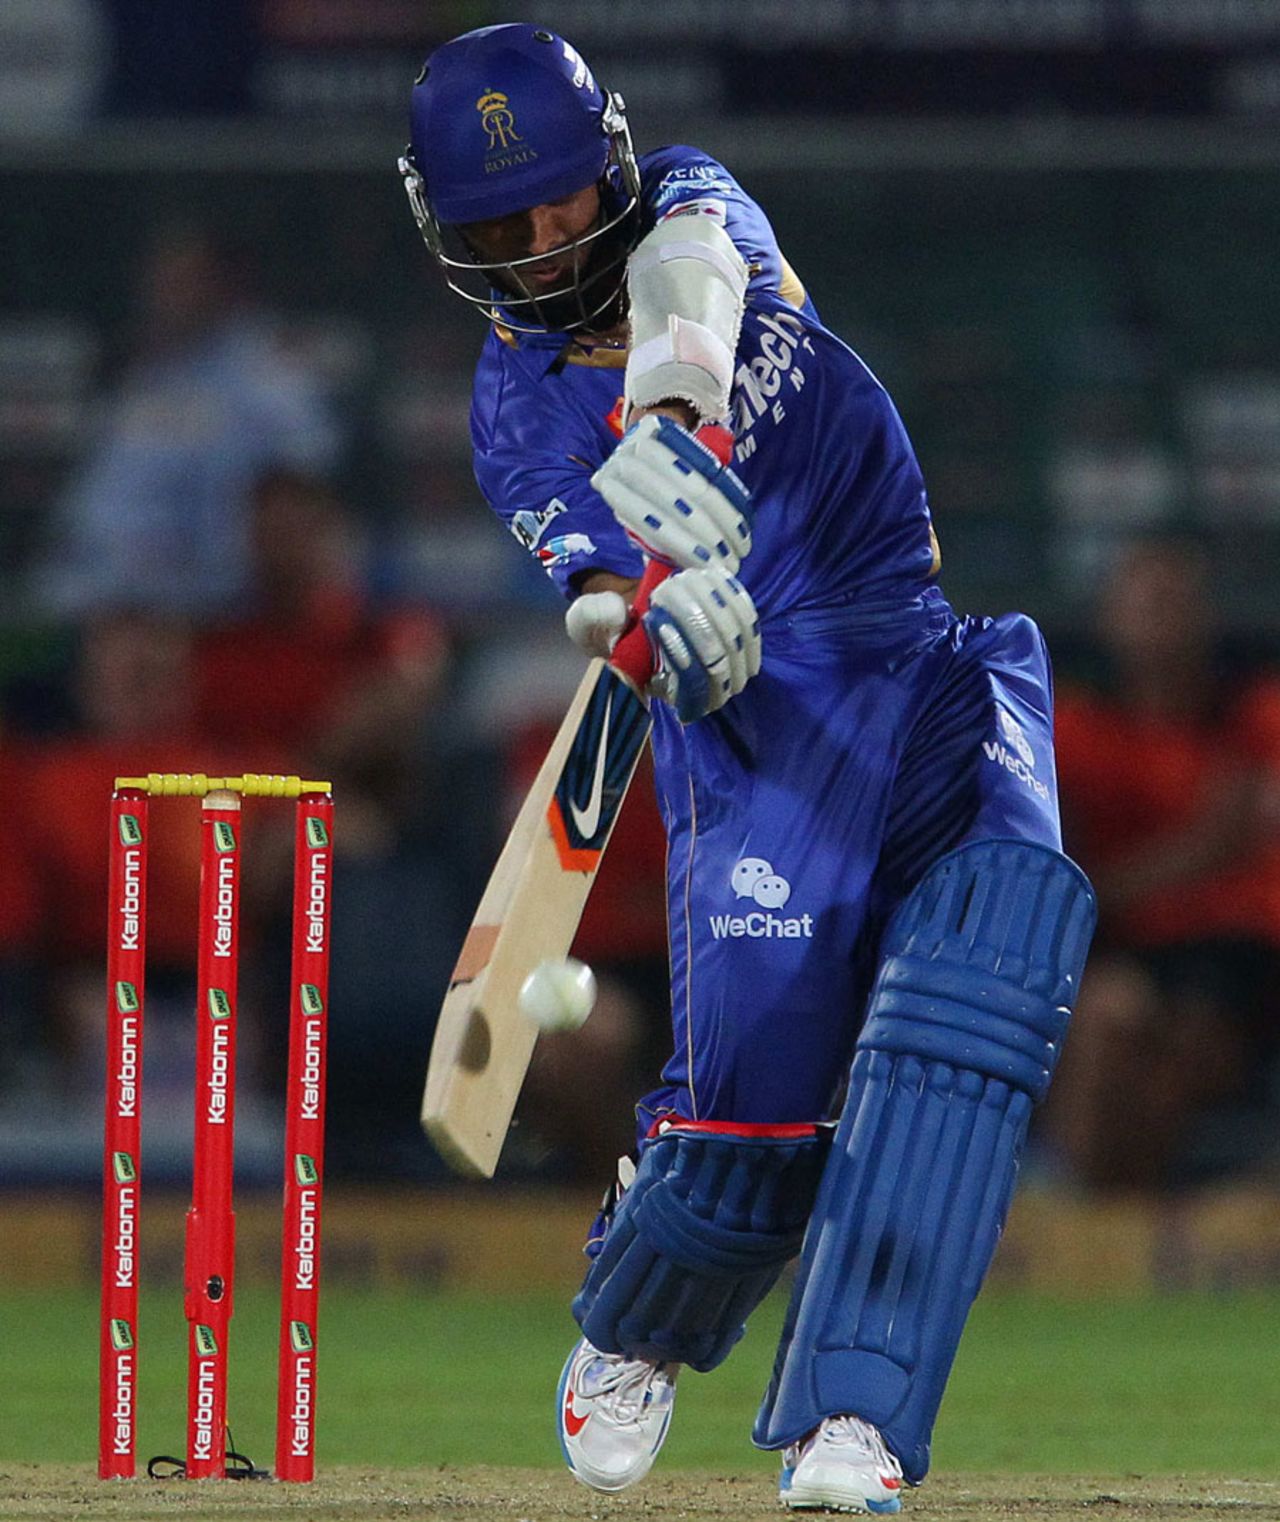 Ajinkya Rahane looks to hit over midwicket, Perth Scorchers v Rajasthan Royals, Group A, Champions League 2013, Jaipur, September 29, 2013